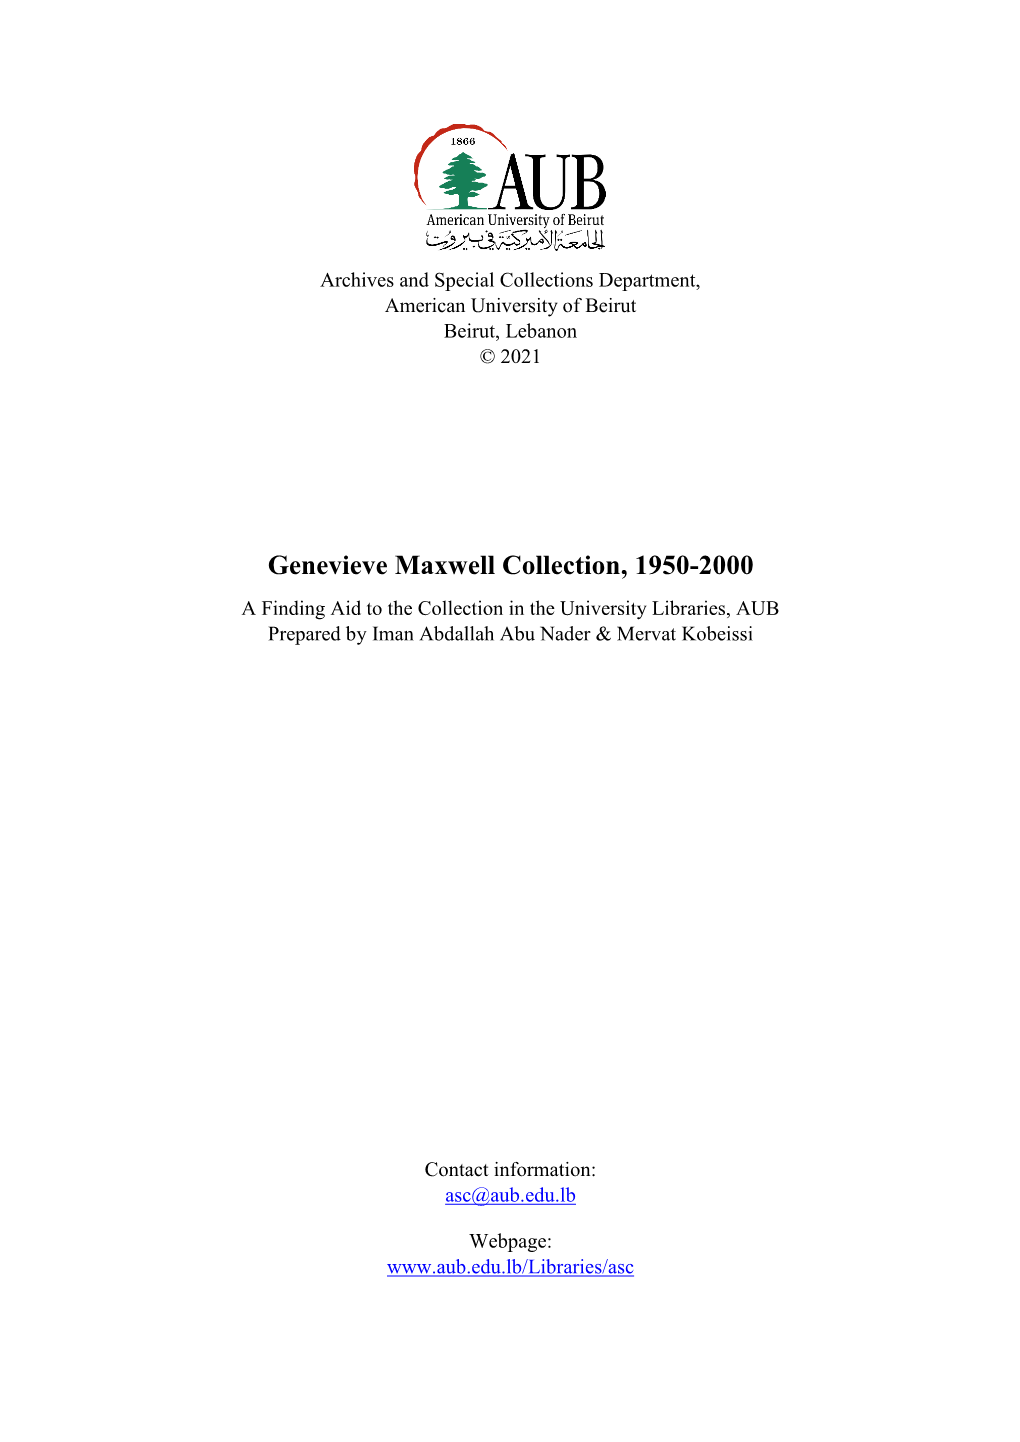 Genevieve Maxwell Collection, 1950-2000 a Finding Aid to the Collection in the University Libraries, AUB Prepared by Iman Abdallah Abu Nader & Mervat Kobeissi